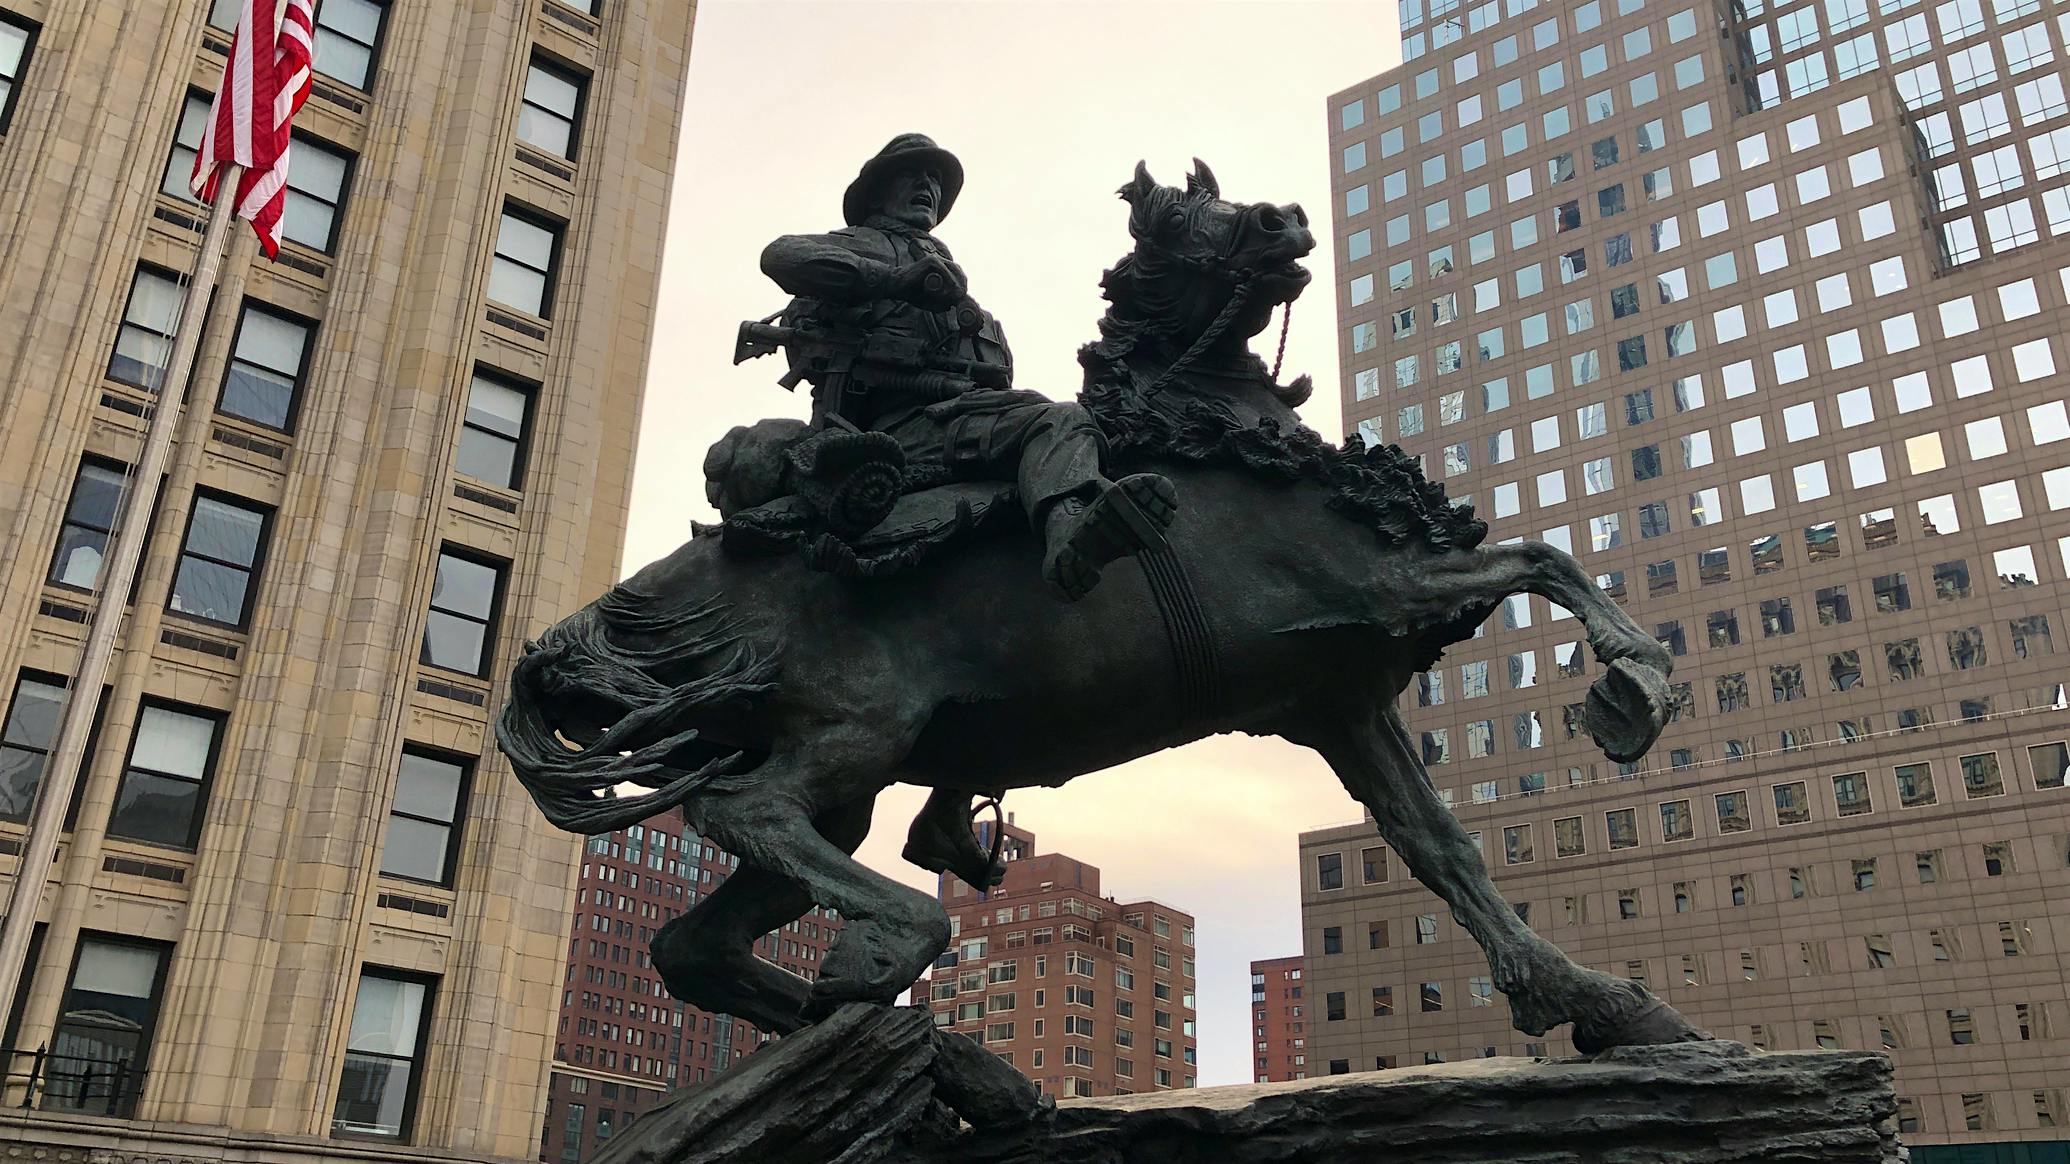 America’s Response Monument at Ground Zero in New York City prominently displays a soldier riding horseback.